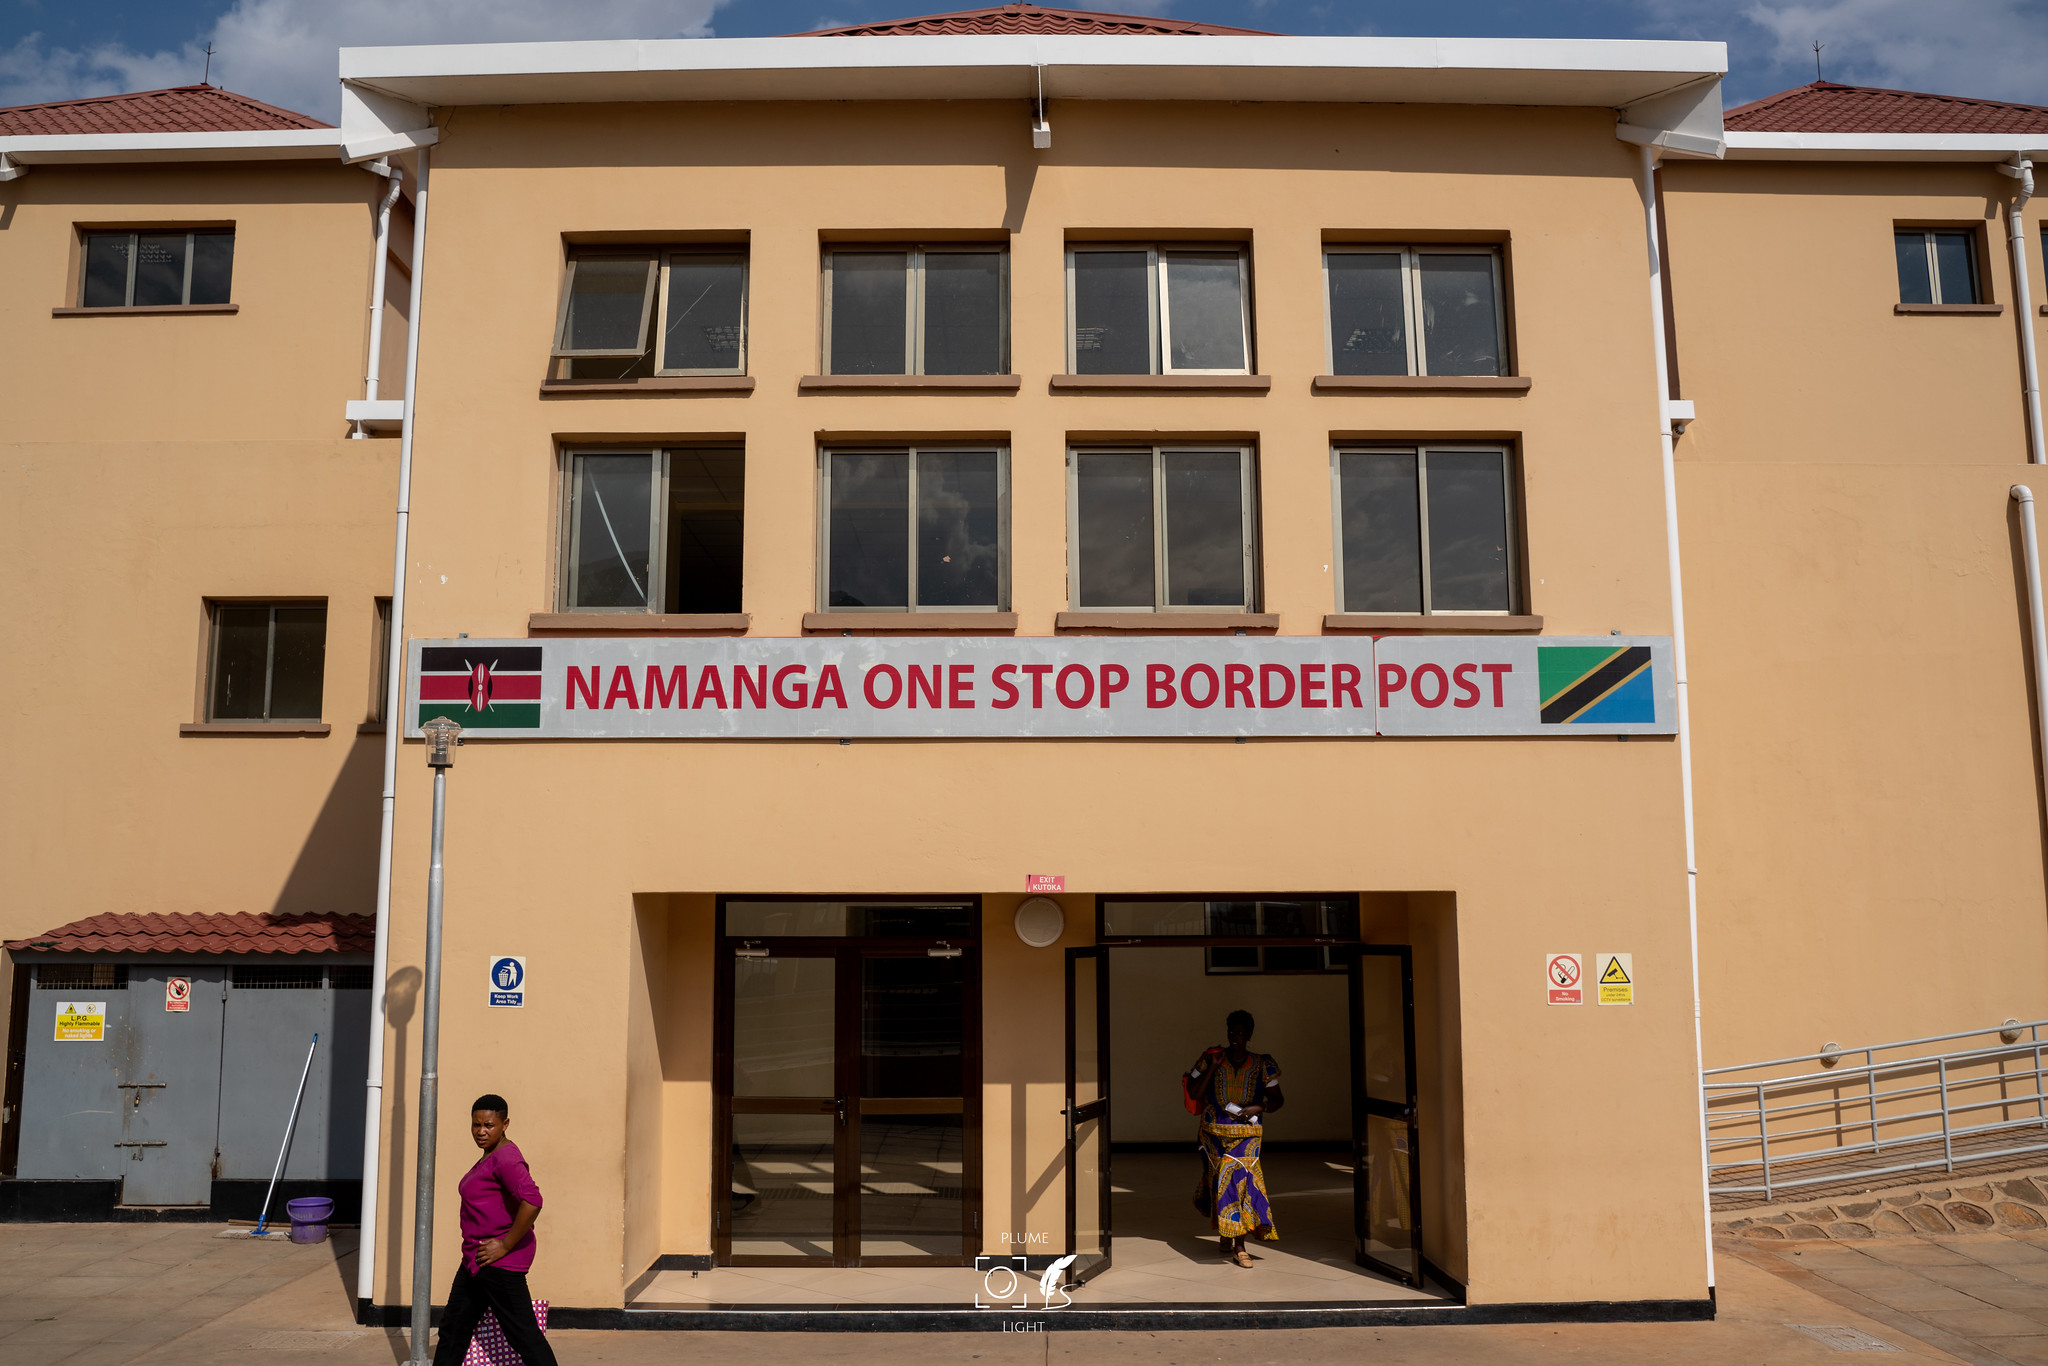 One stop border post